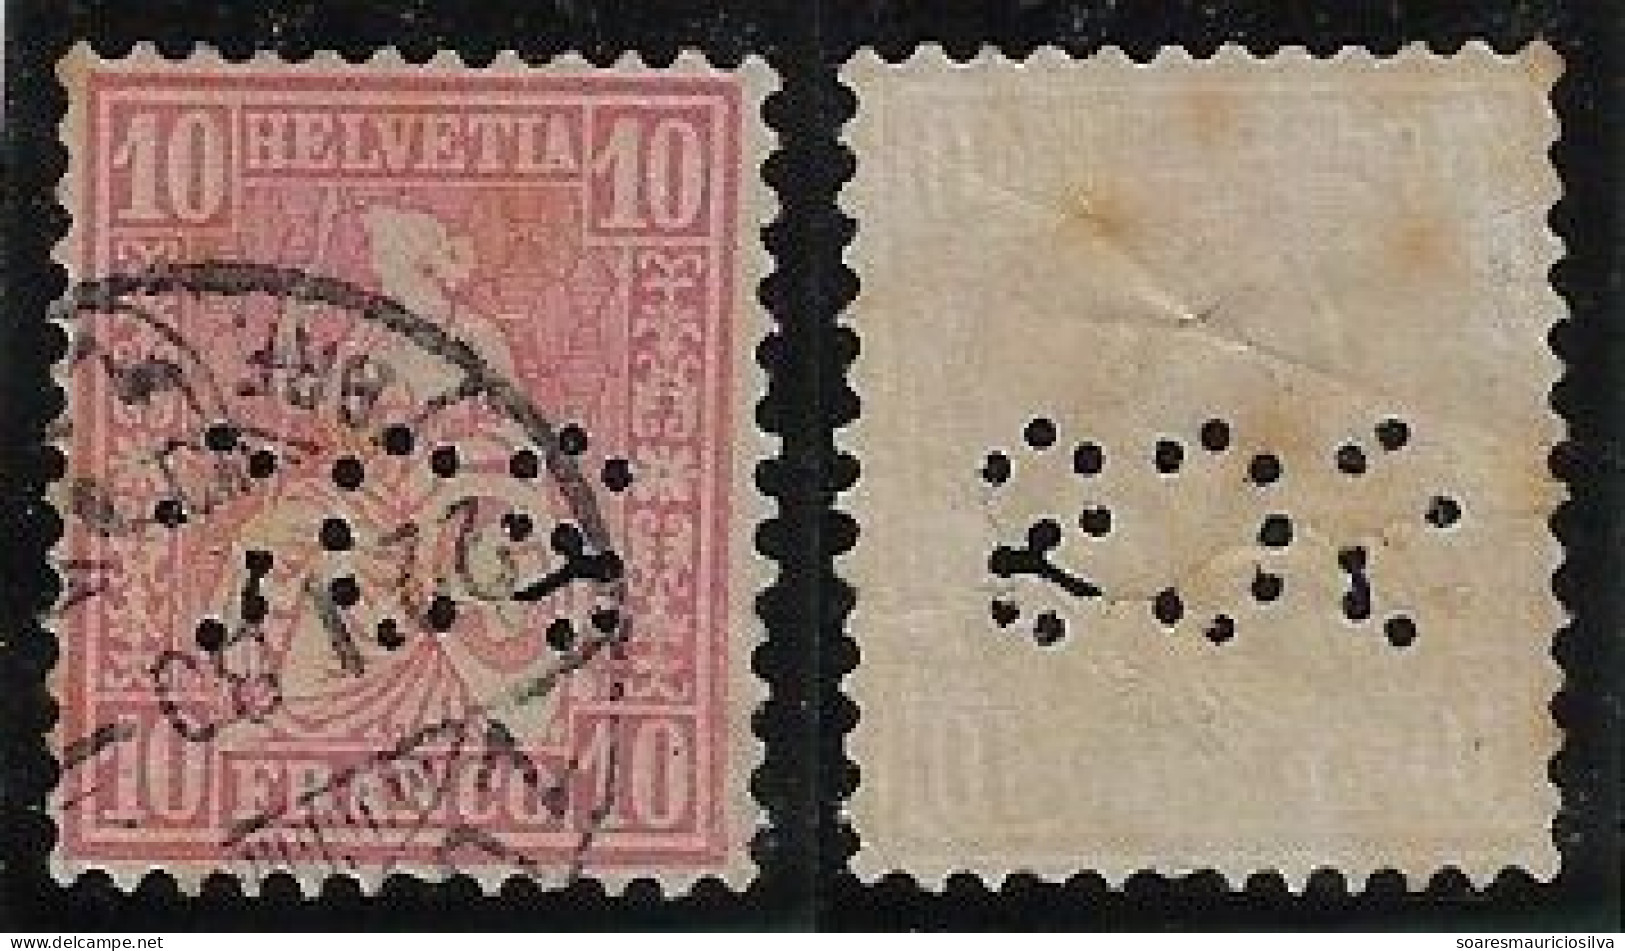 Switzerland 1874/1893 Stamp Perfin SCS By Société Crédit Suisse Swiss Credit Company From Zuriche Lochung Perfore - Perfins